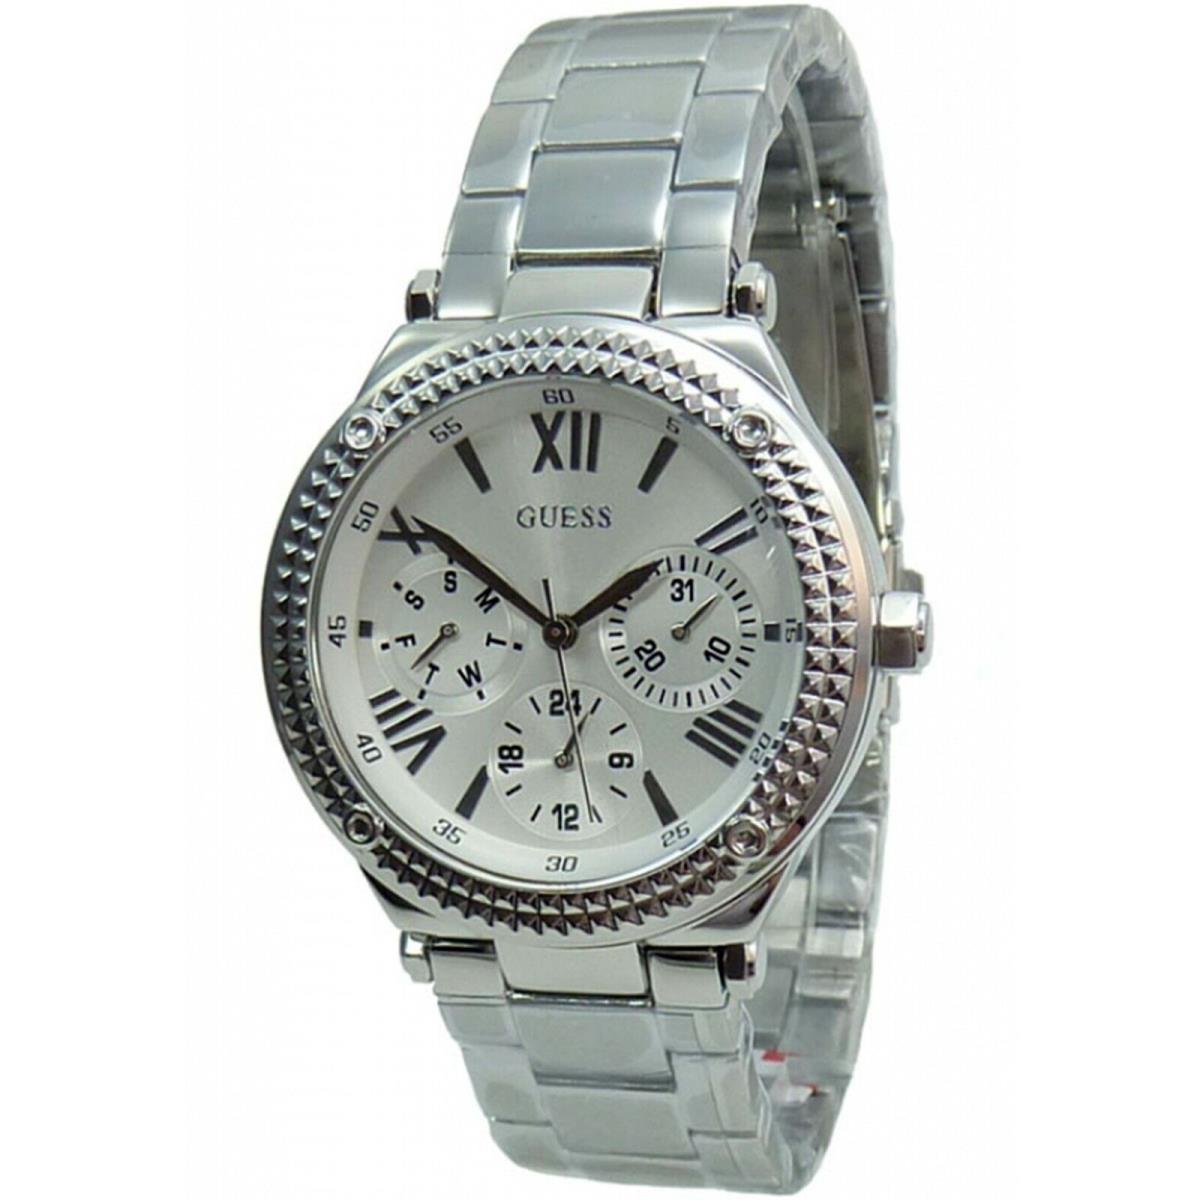 Guess W0331L1 Ladies Multi-functions Silver-tone Case Accented Bezel 50m WR